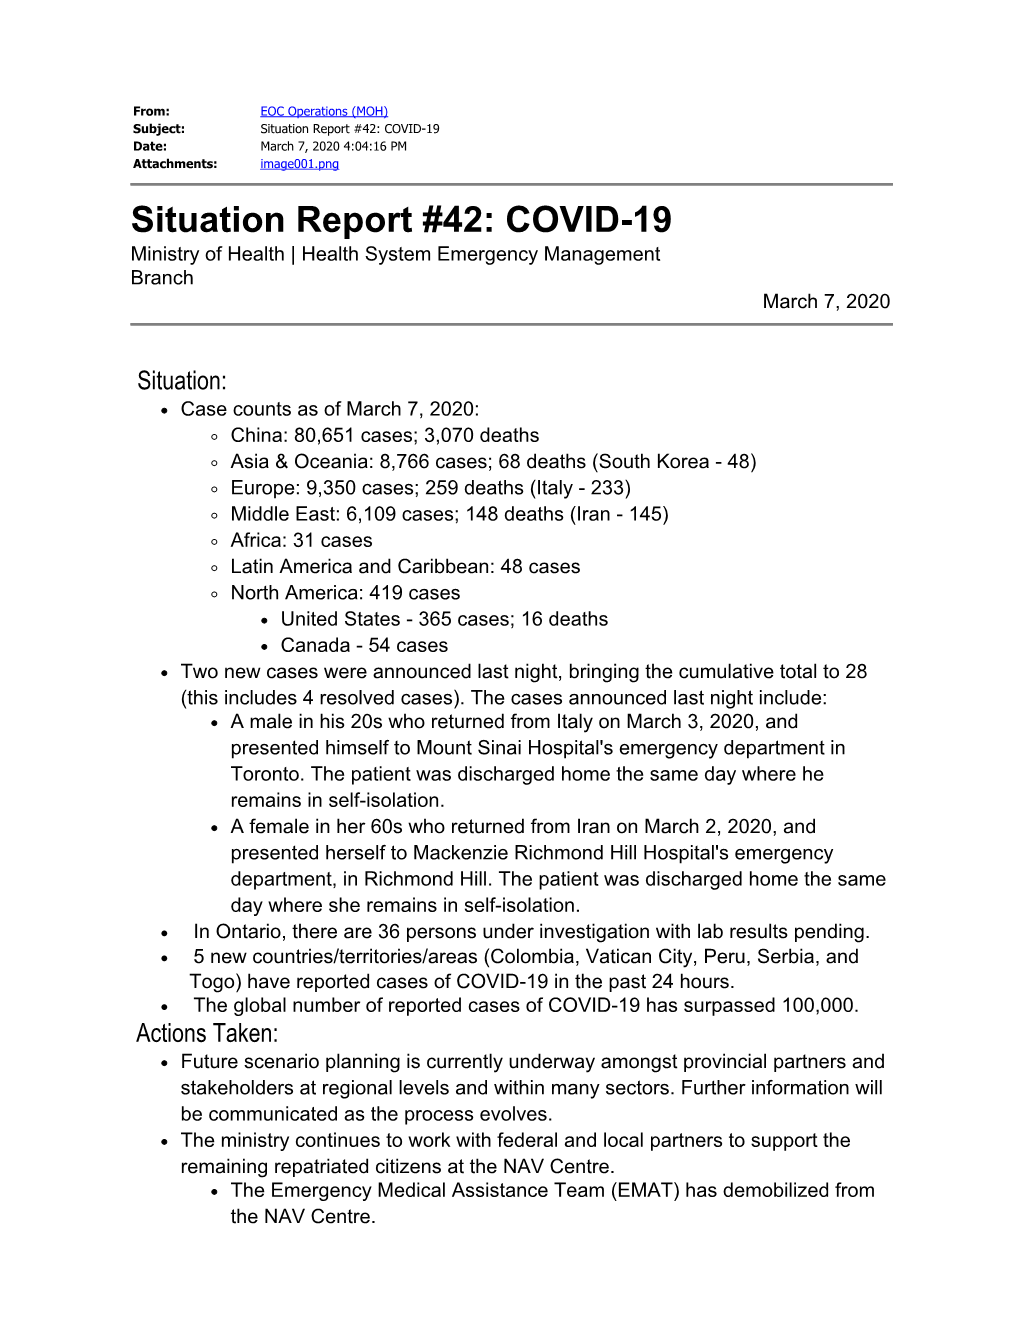 Situation Report #42: COVID-19